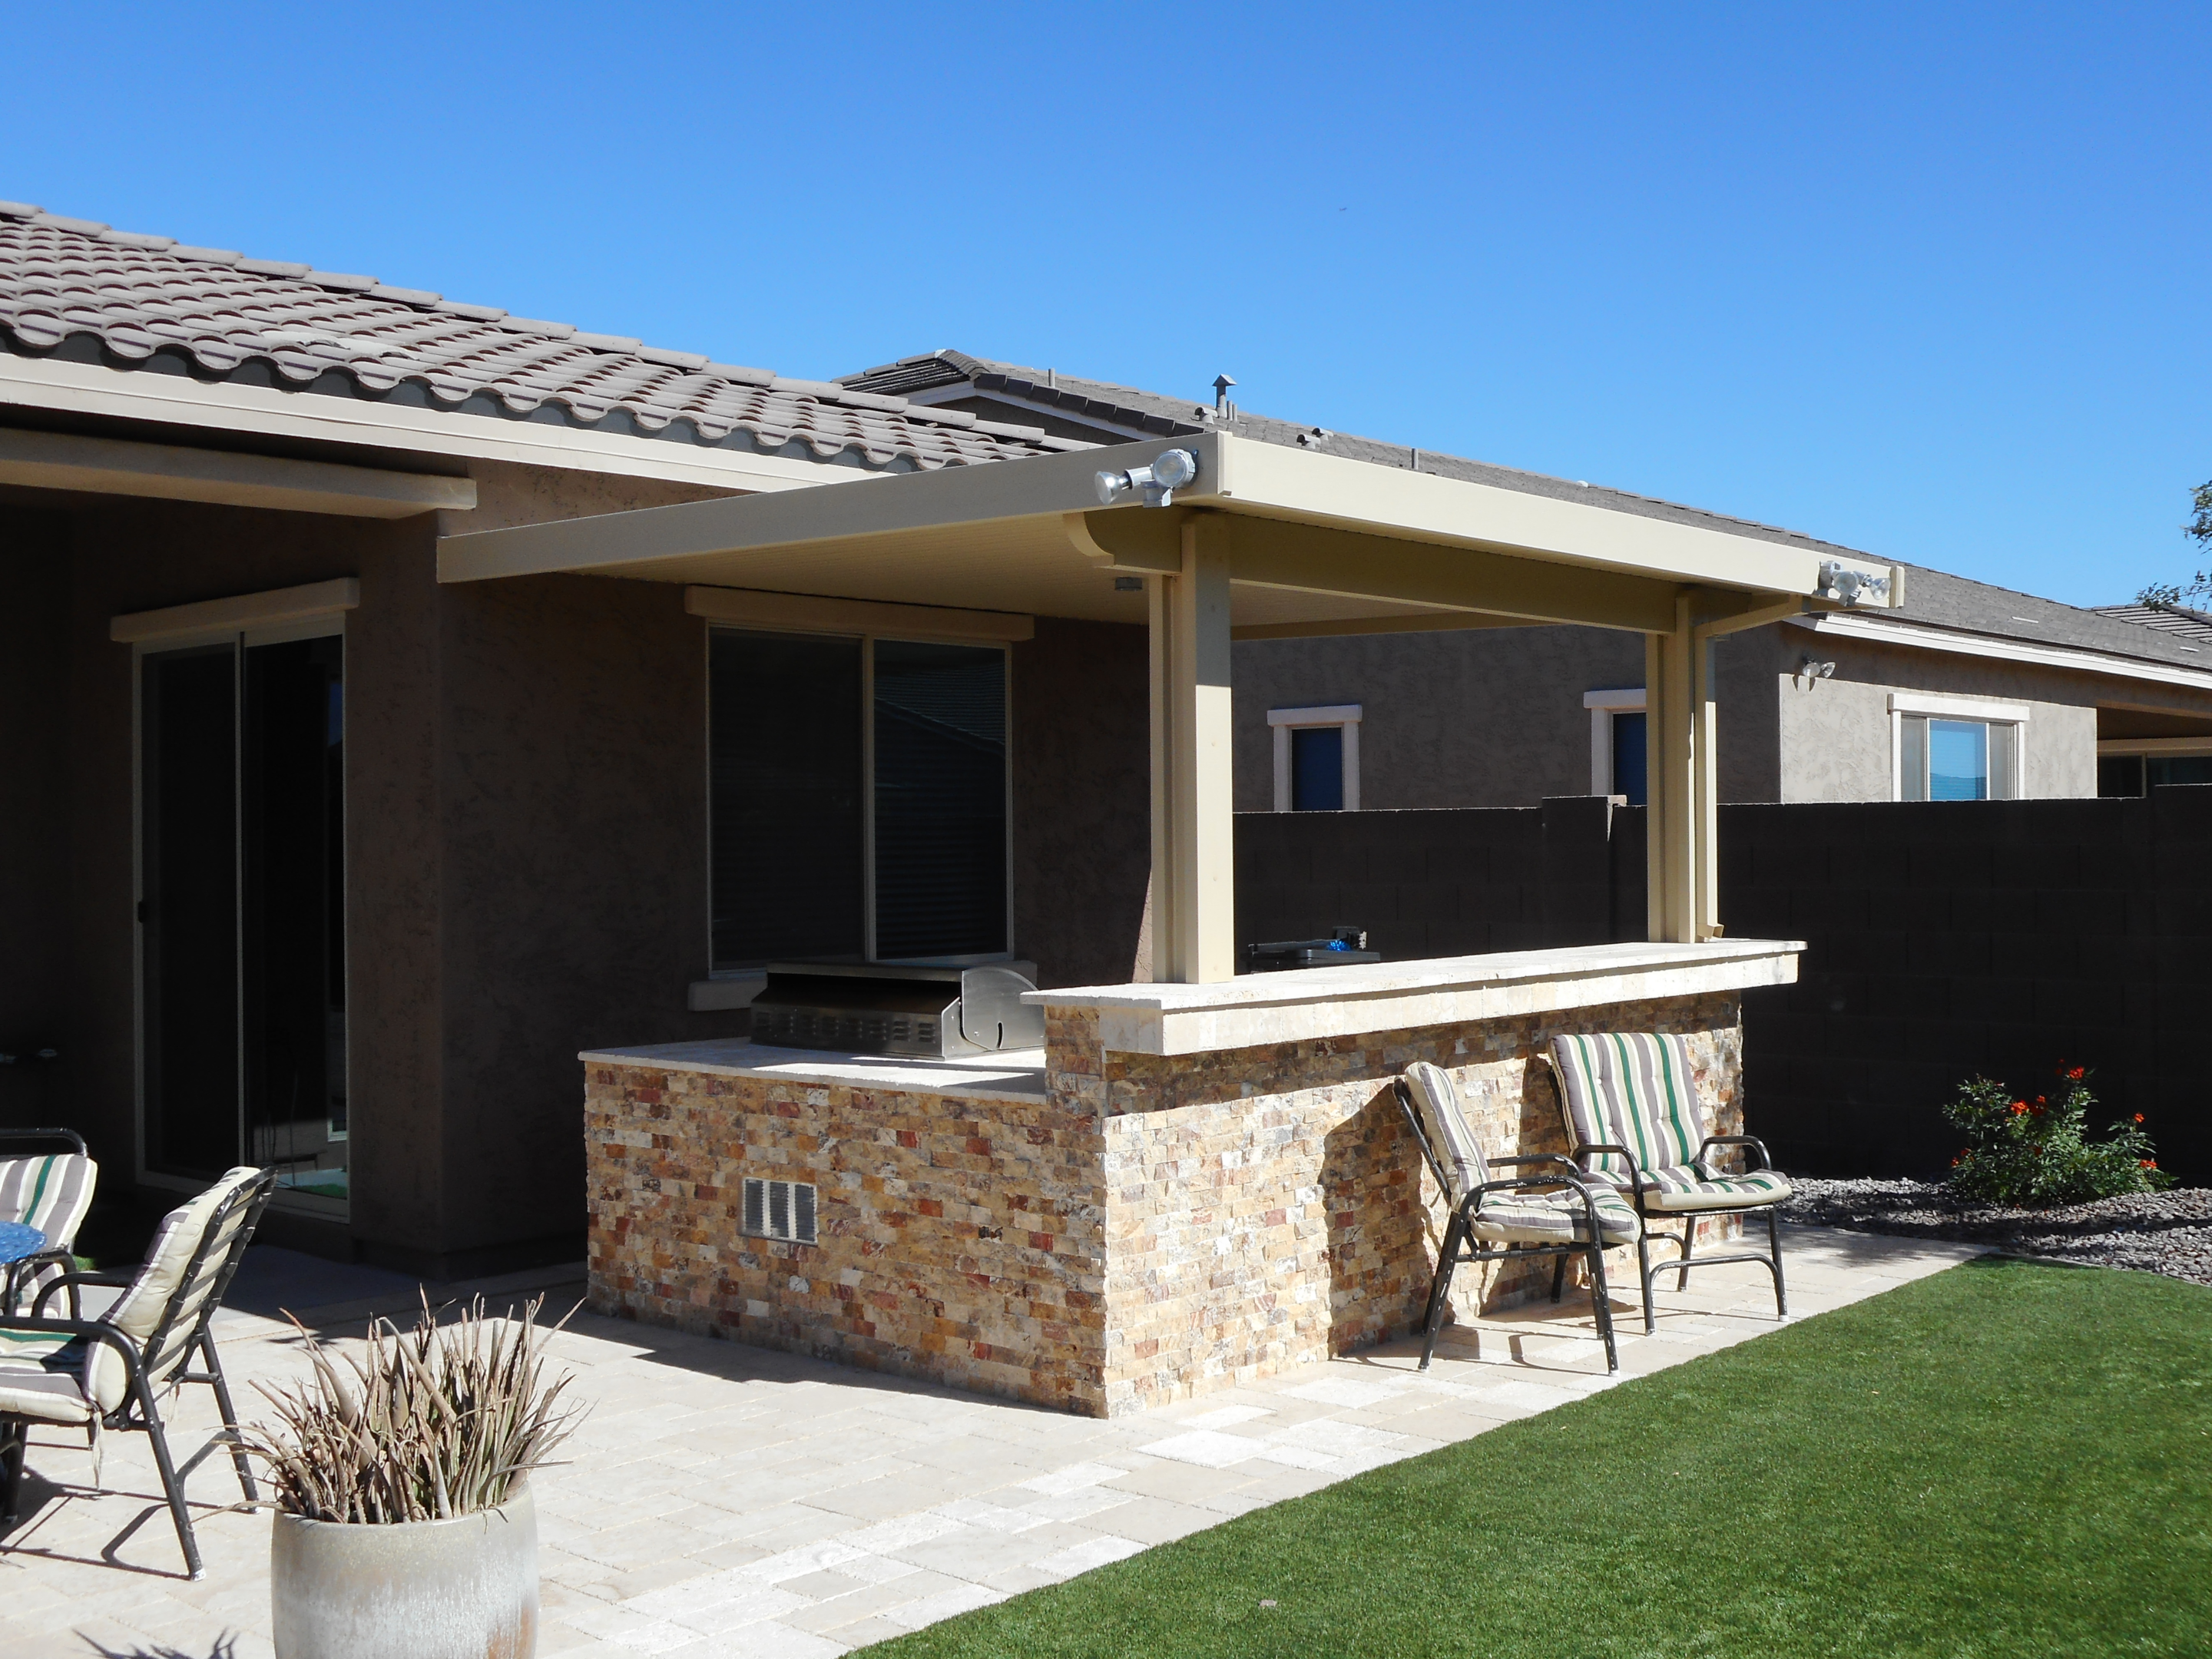 Transformed outdoor living space with Alumawood patio cover